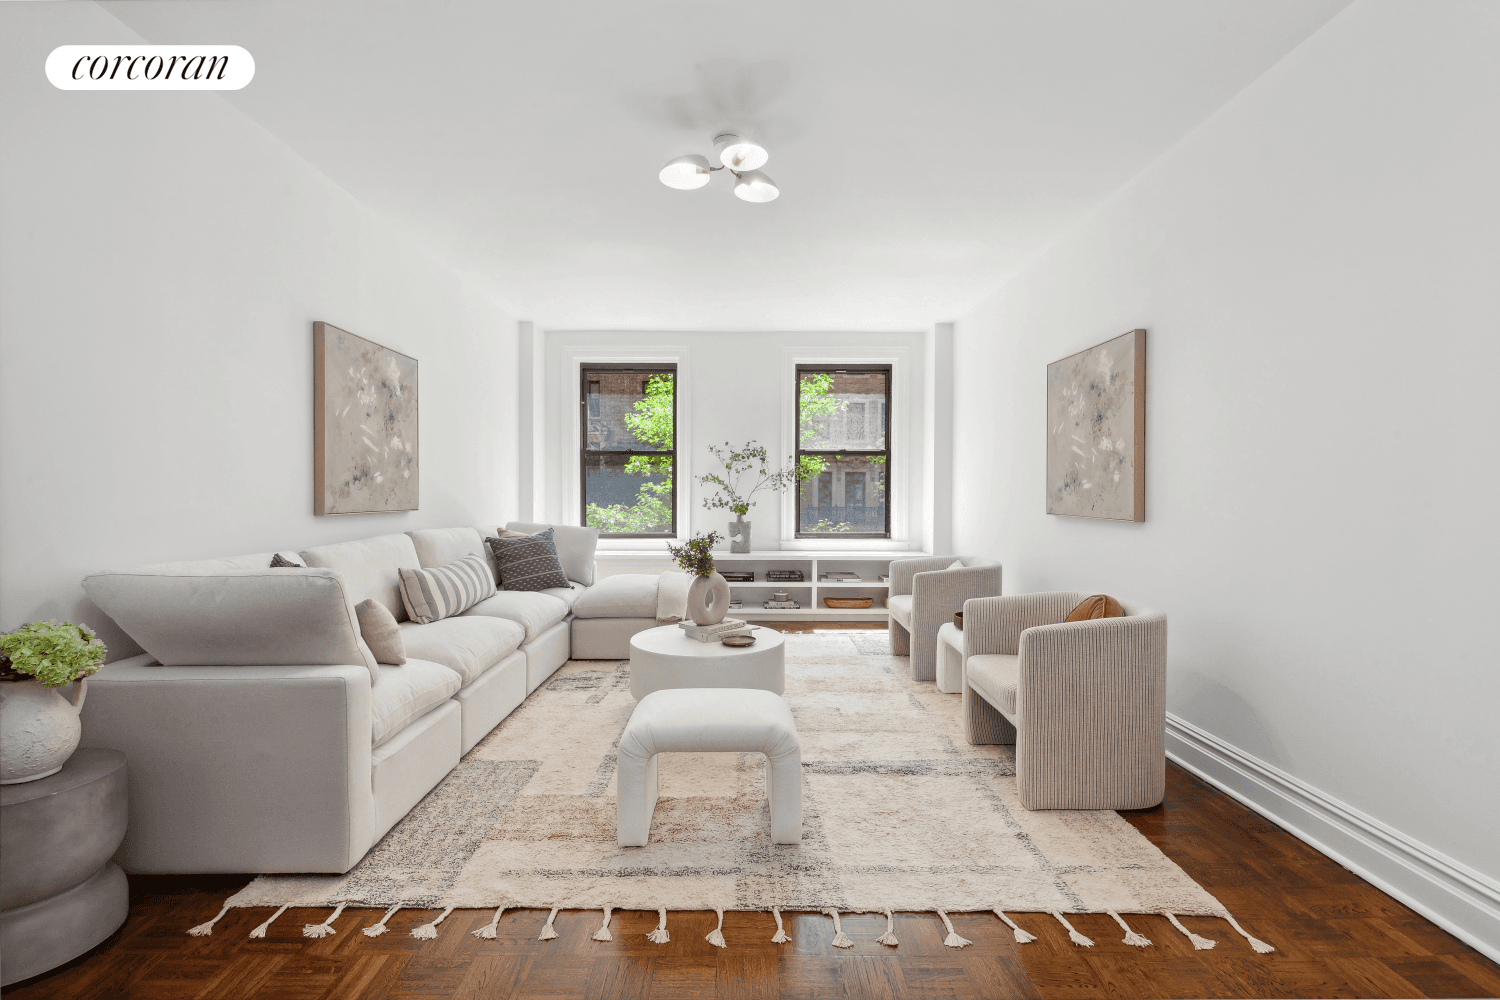 Welcome to 325 West 86th Street Apartment 3C, a south facing co op in an elegant full service building in the heart of the Upper West Side.